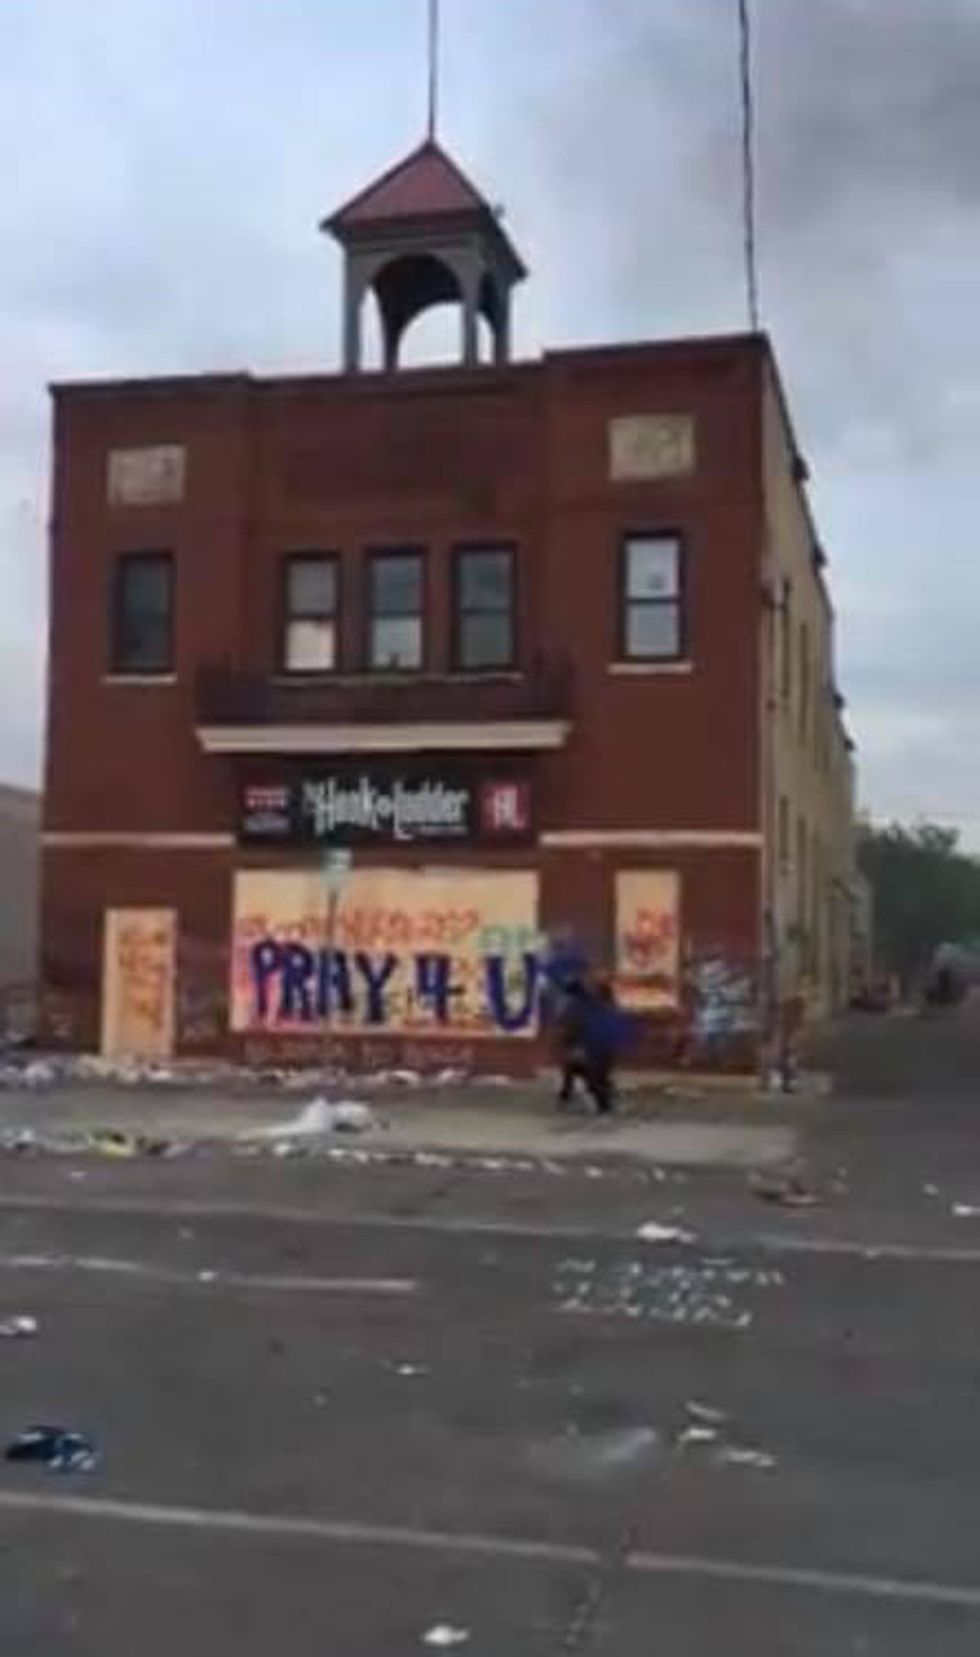 A blurry image of a boarded up building with a sign that says "Pray 4 U." The street is littered with debris.